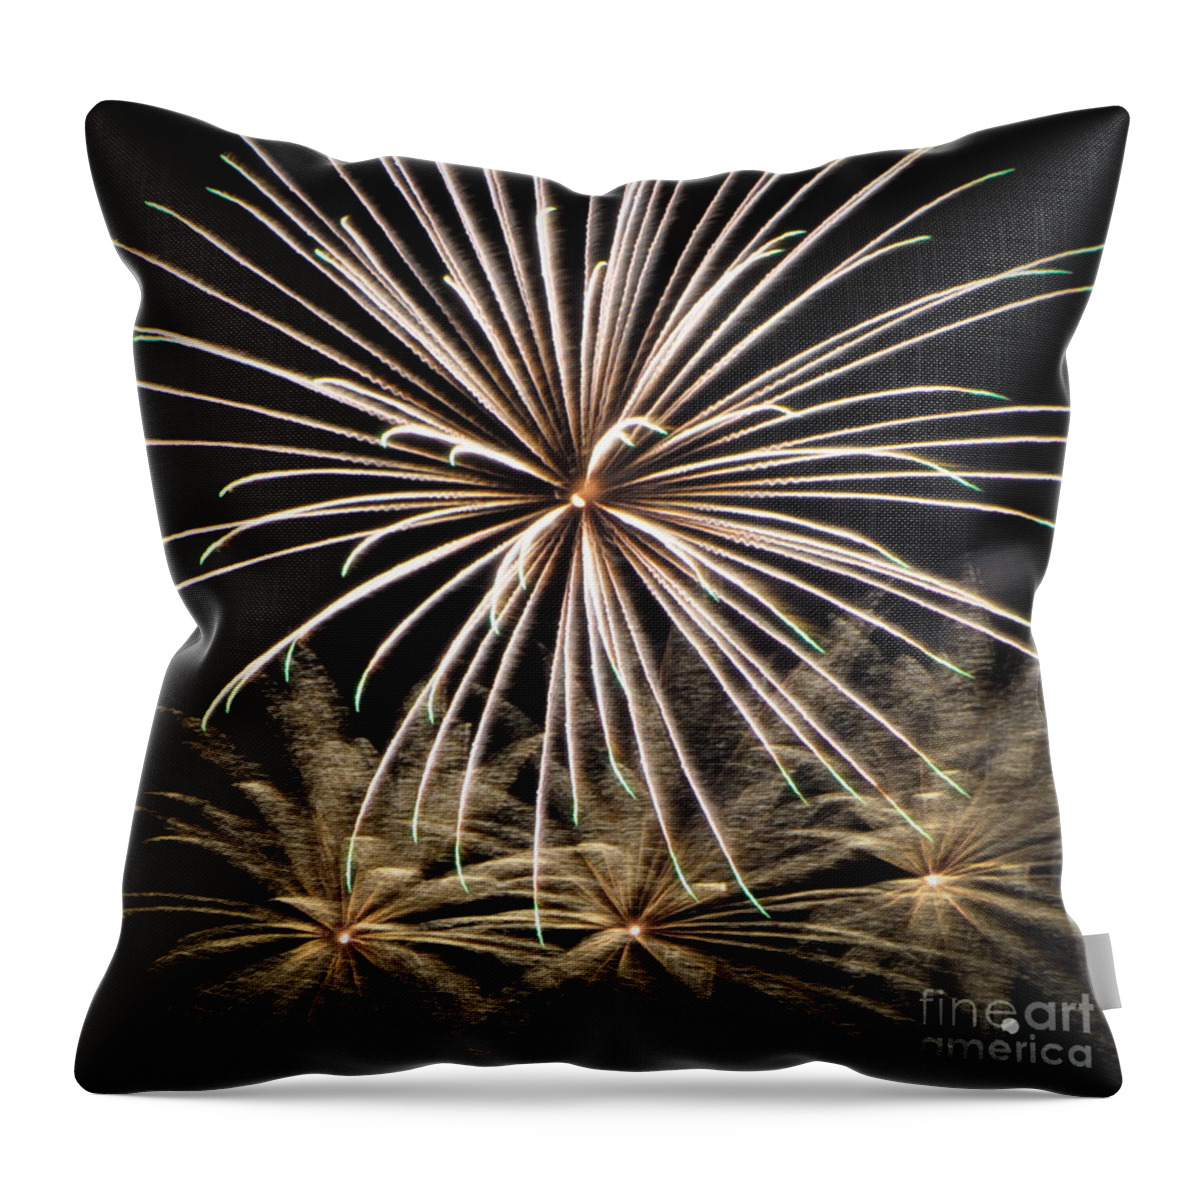 Fireworks Throw Pillow featuring the photograph Fireworks 4 by Ronald Grogan